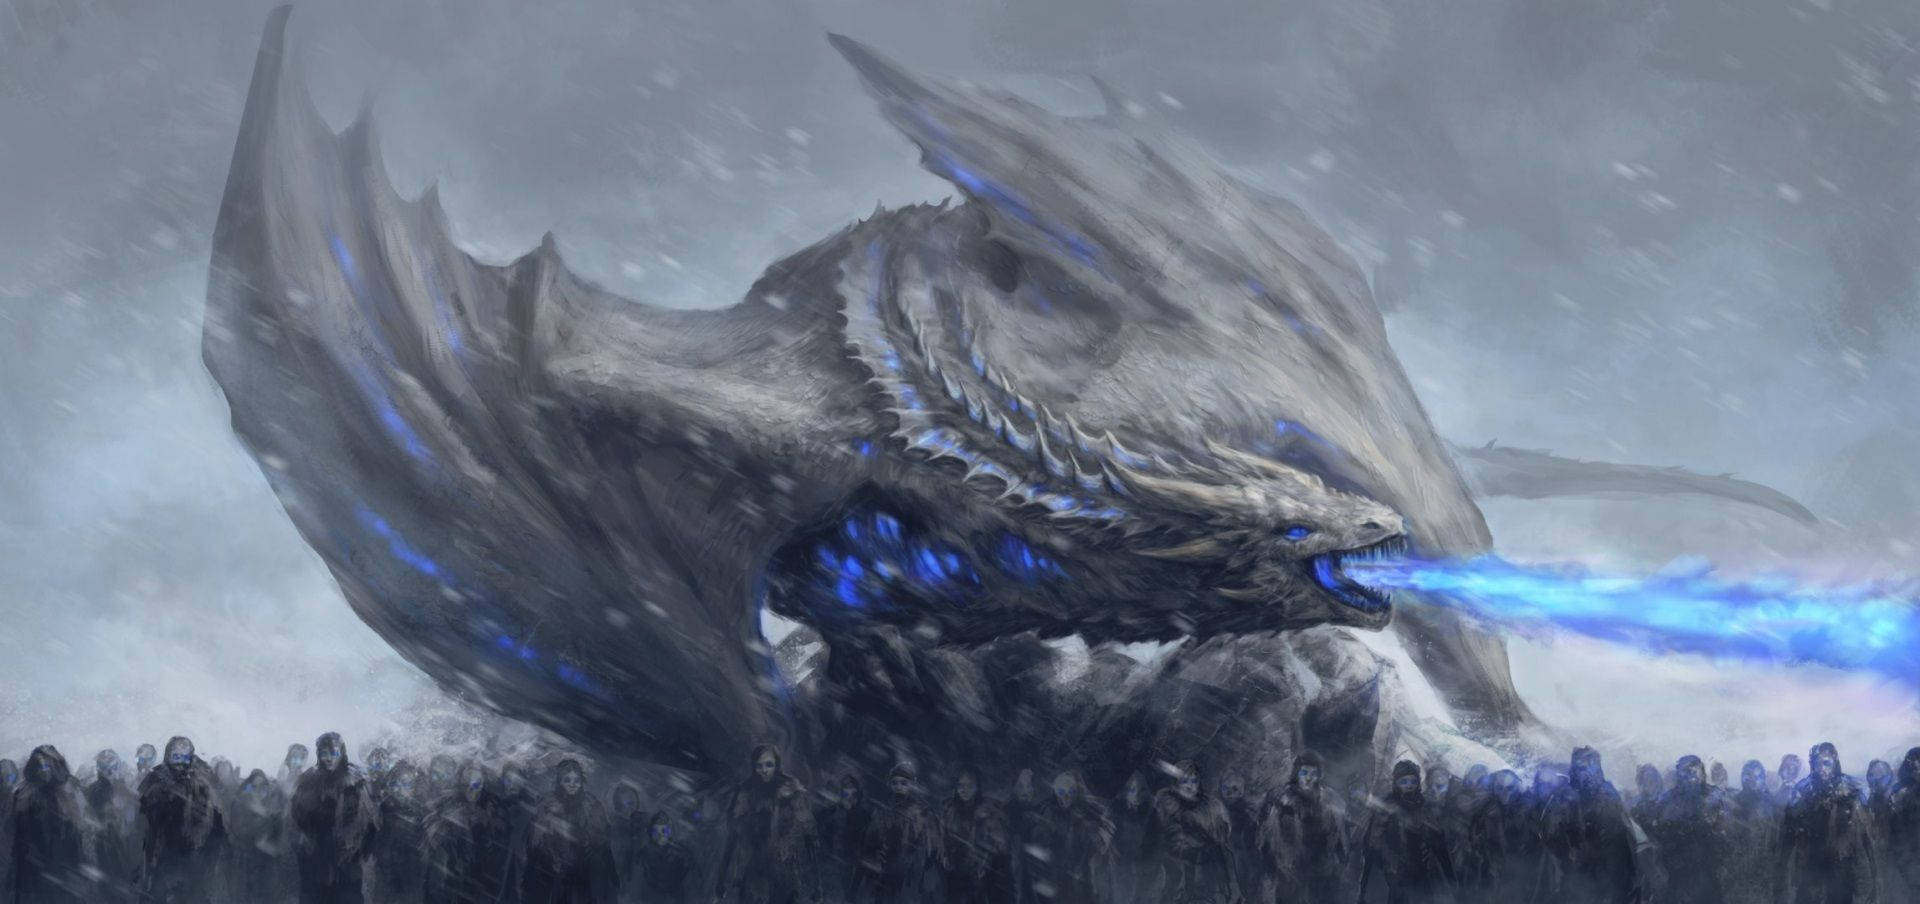 Game Of Thrones Season 8 Viserion Flame Picture